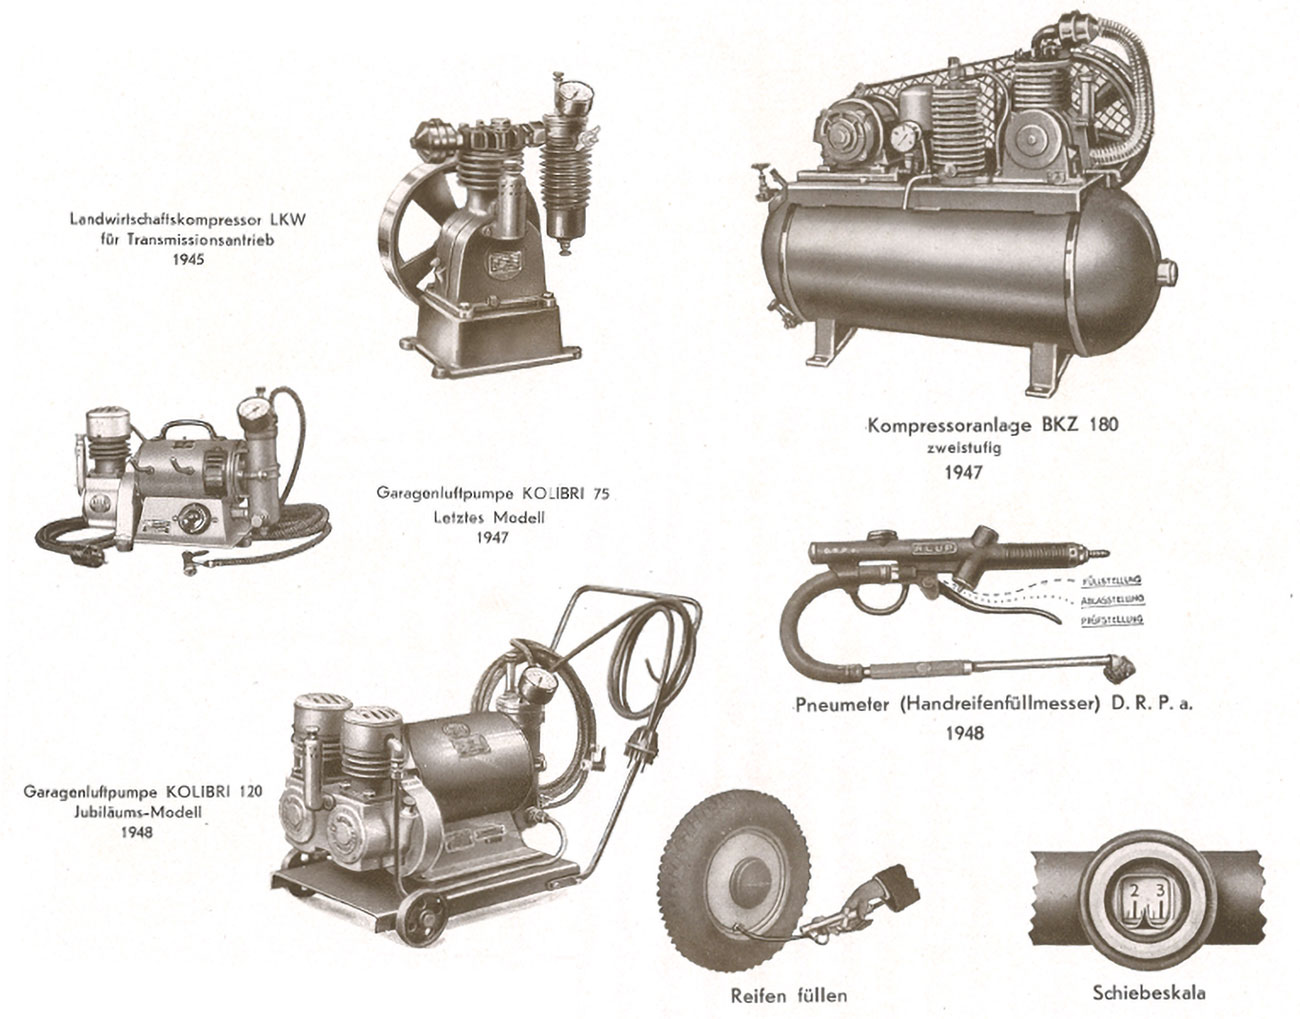 Compressed air tools and compressors by Adolf Ehmann from the 1940s